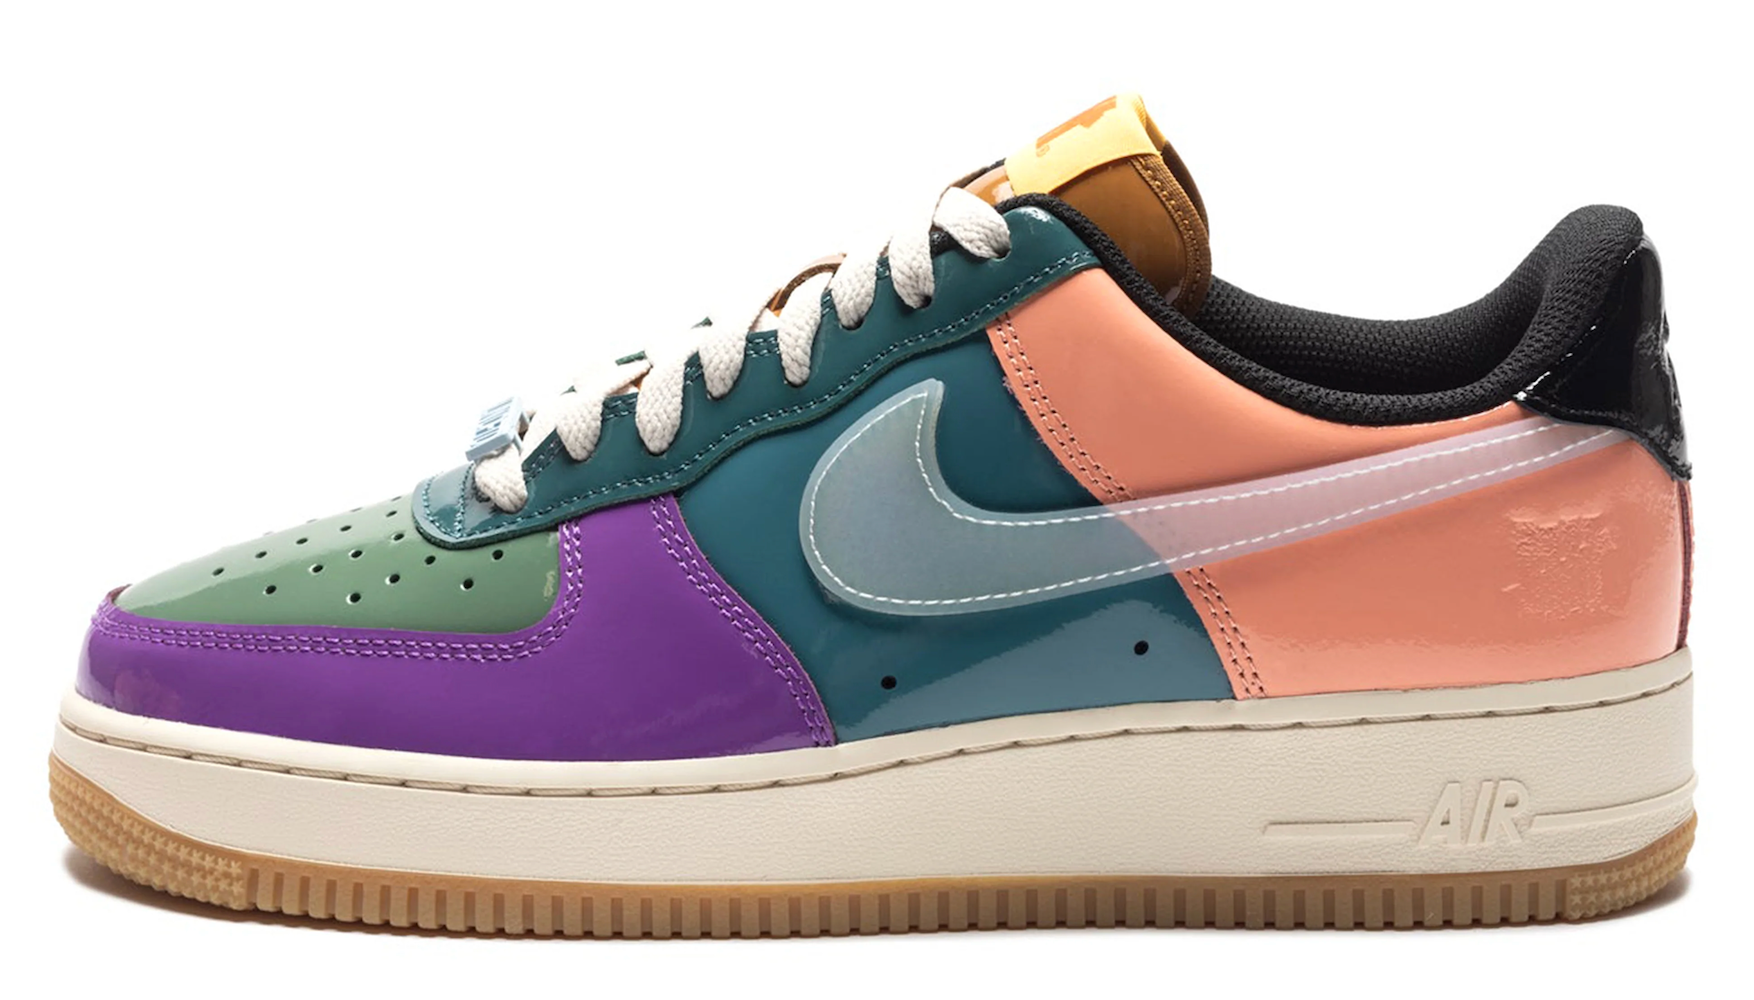 NIKE AIR FORCE 1 LOW UNDEFEATED MULTI-PATENT PURPLE GREEN